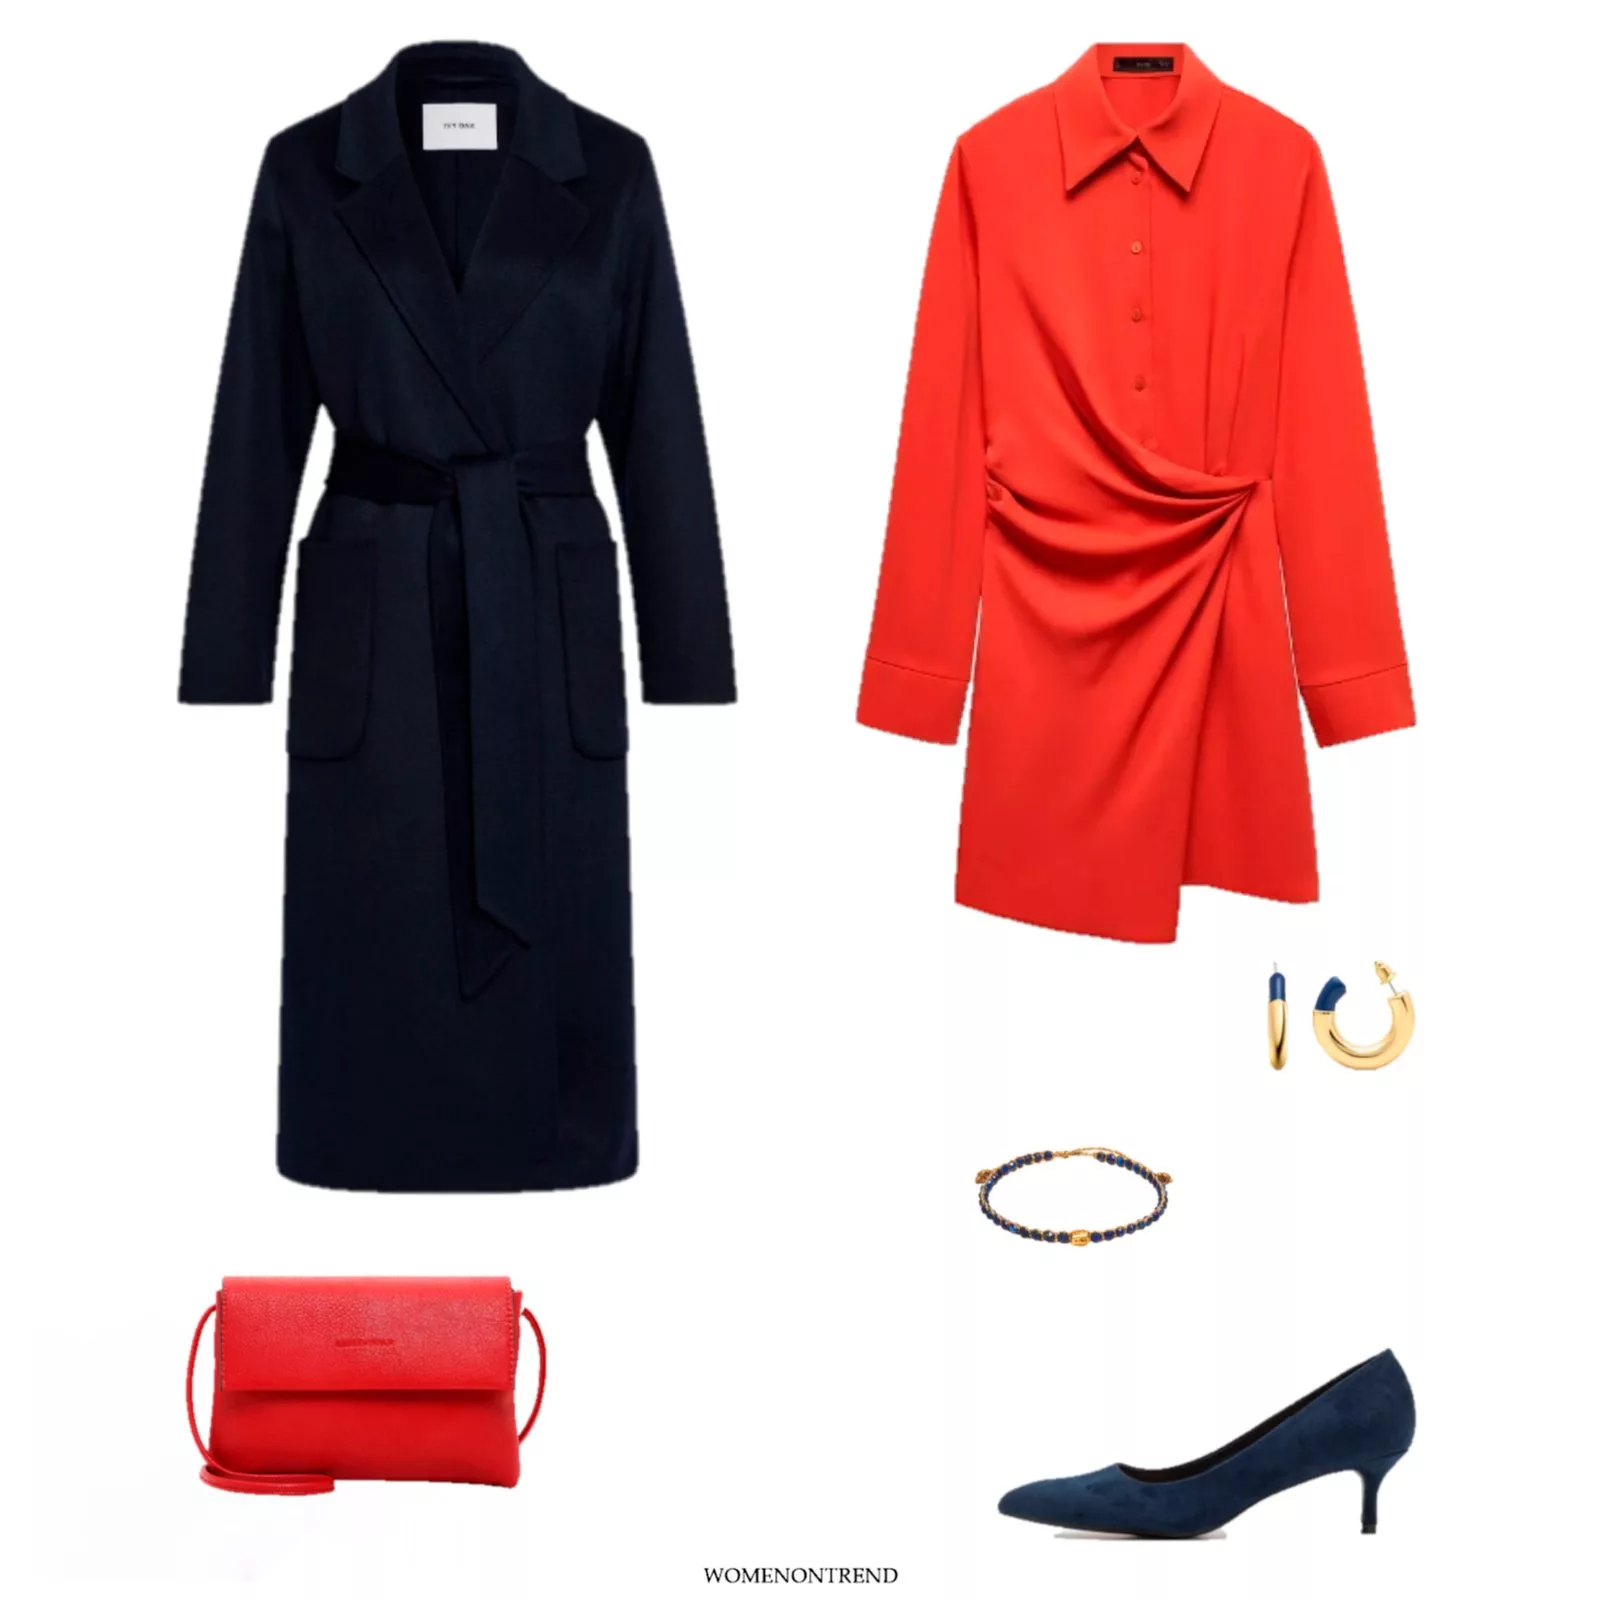 Chic Valentine’s Day Look: Red Dress & Navy Accents